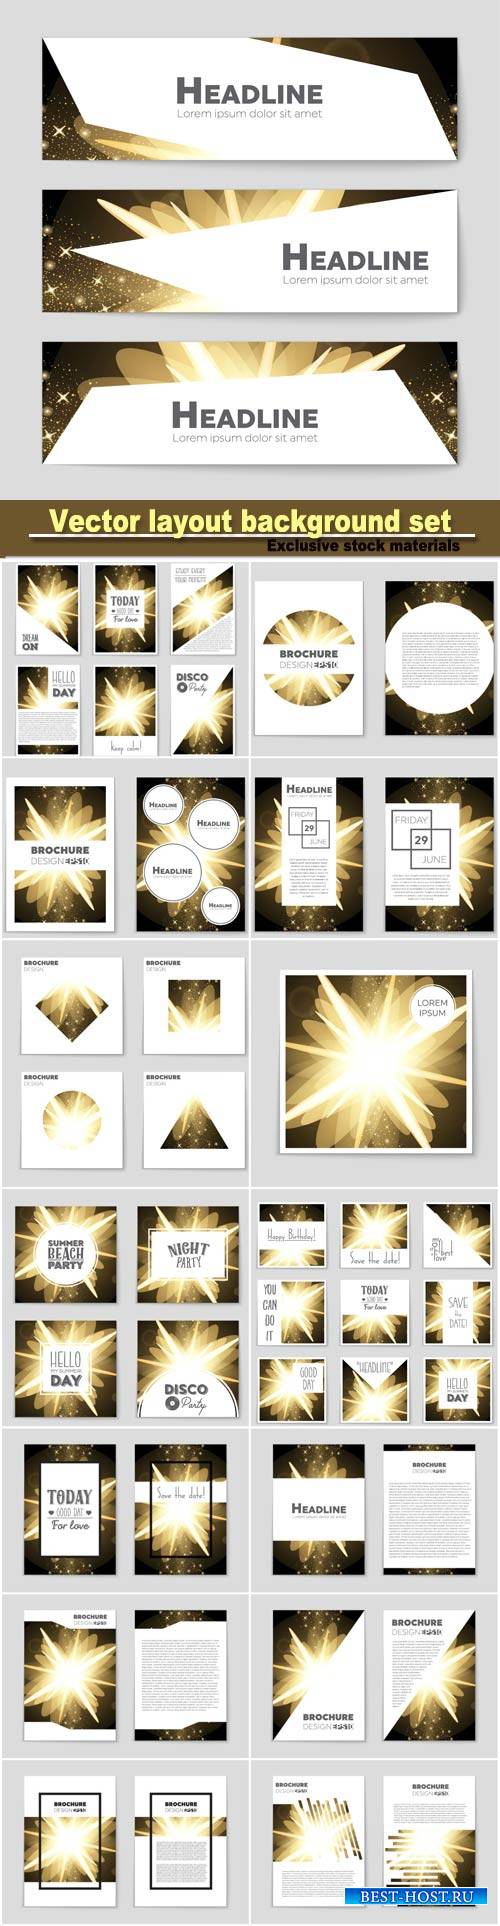 Abstract vector layout background set, mockup brochure theme style